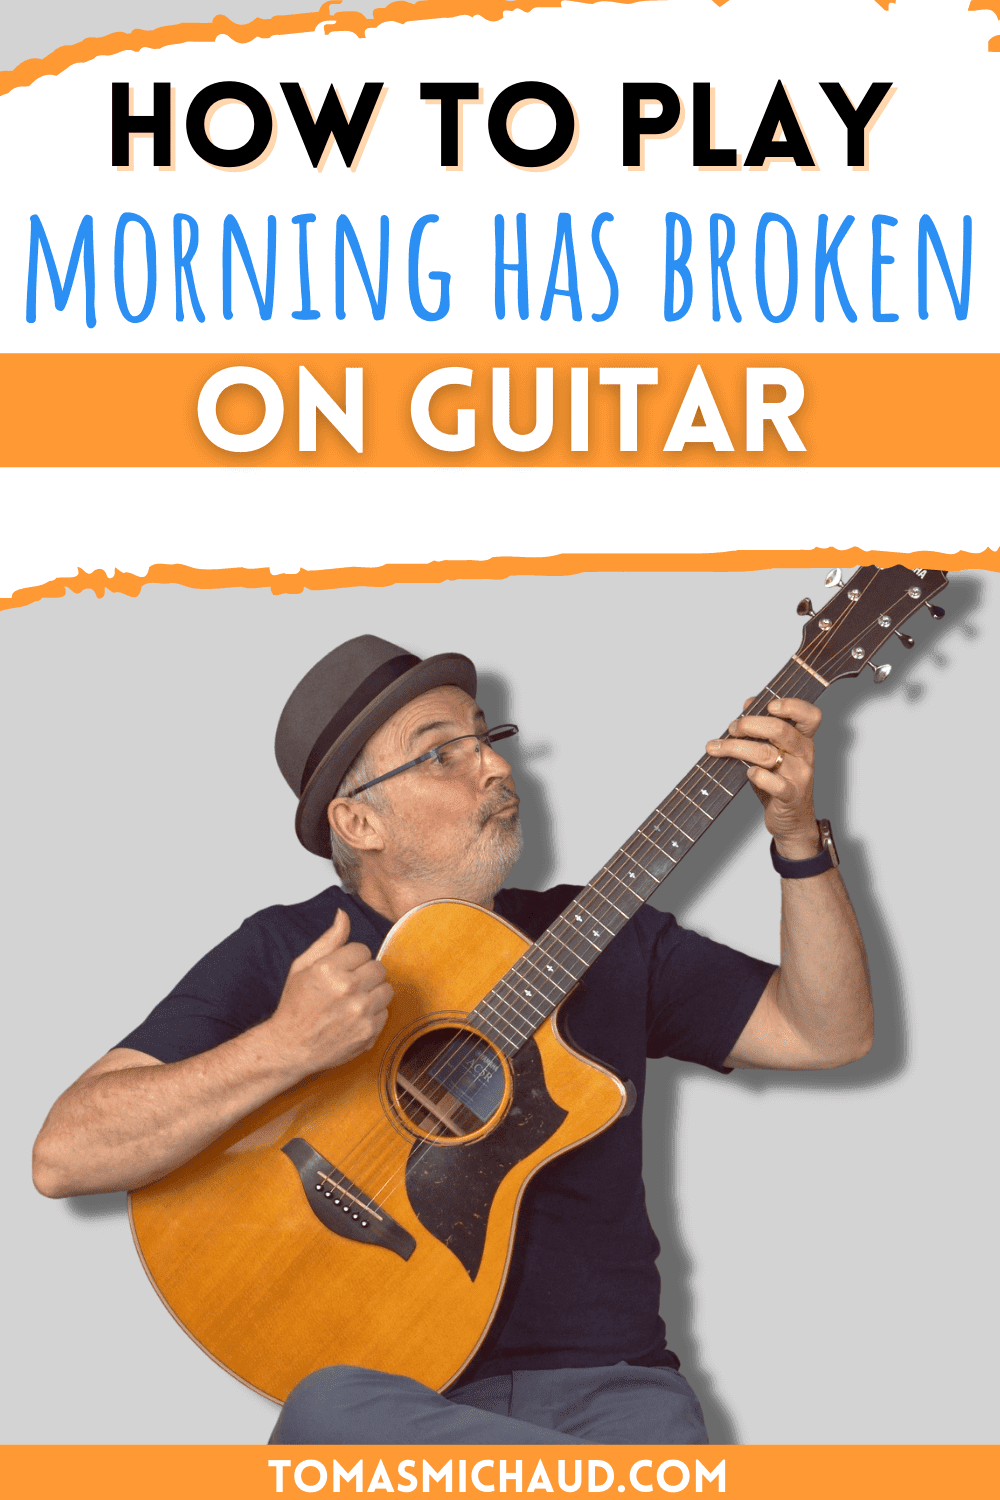 How to play morning has broken on guitar